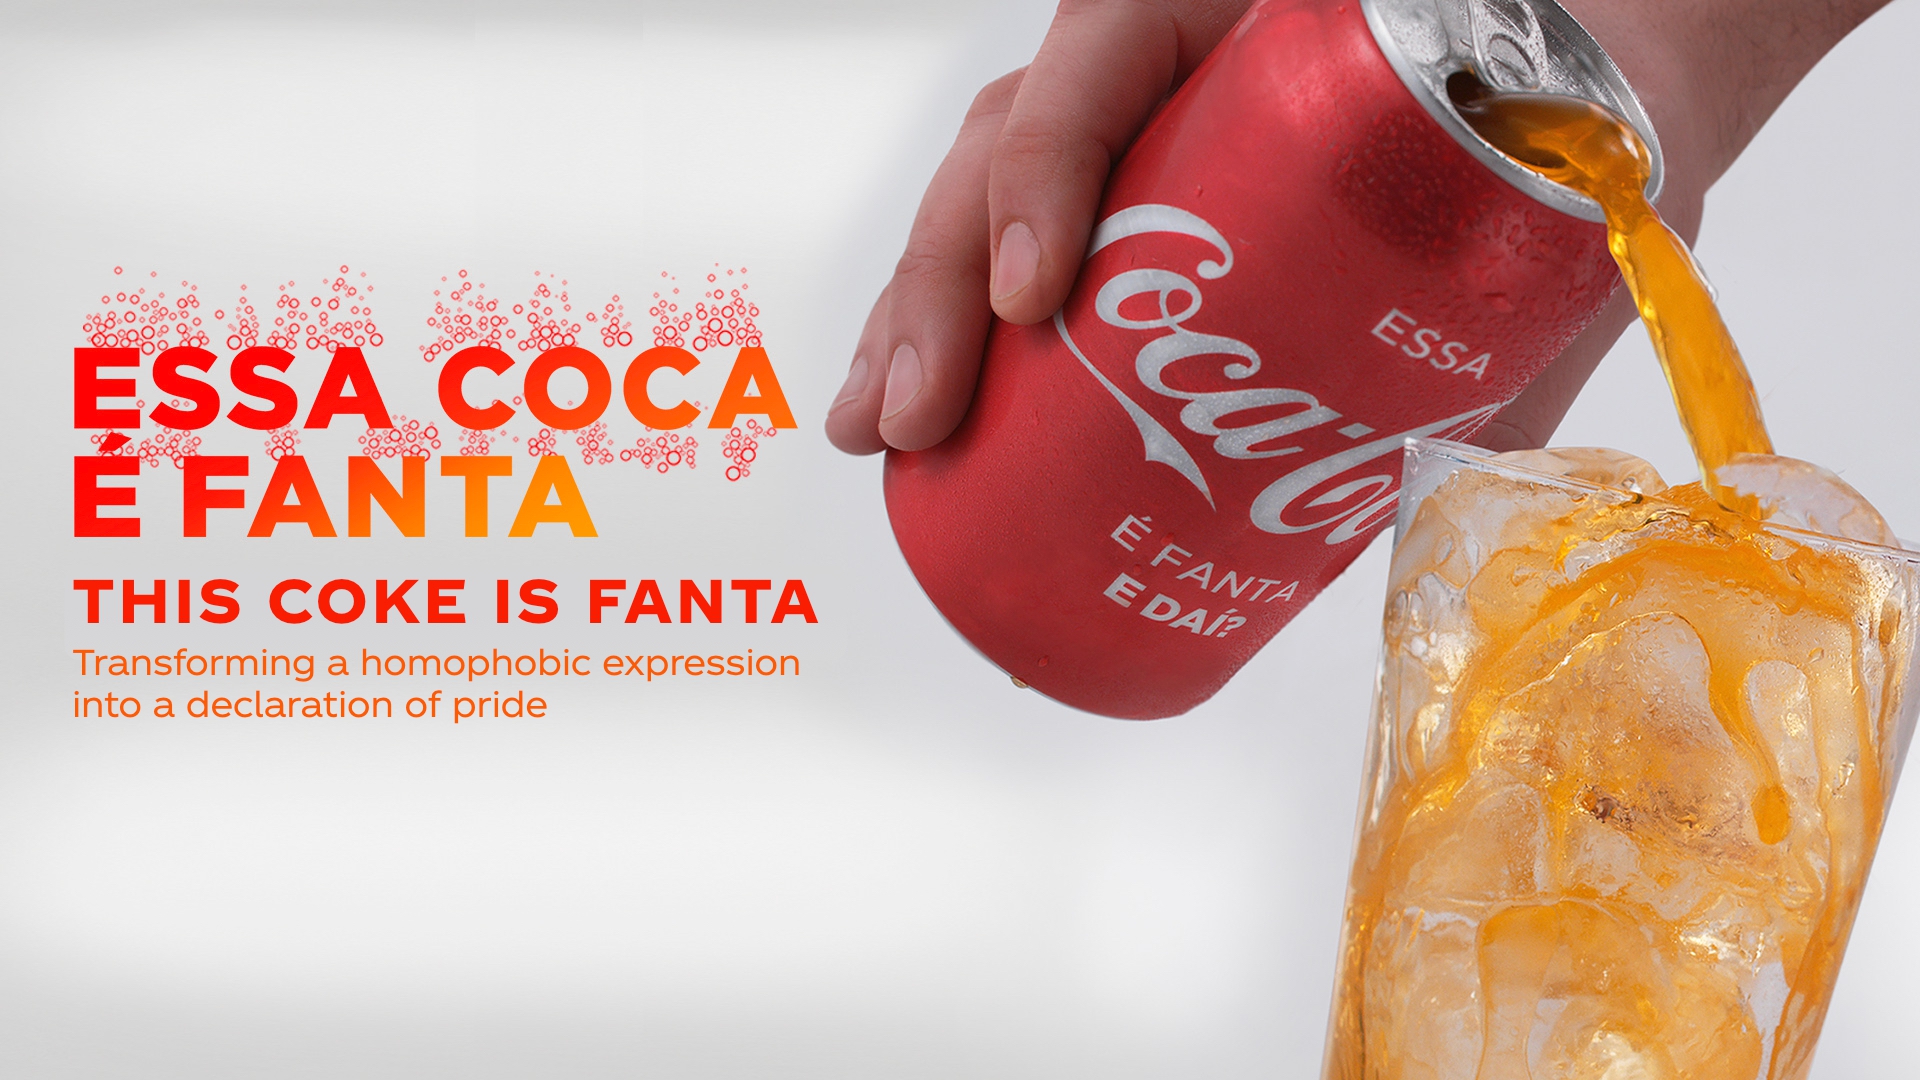 This Coke is a Fanta